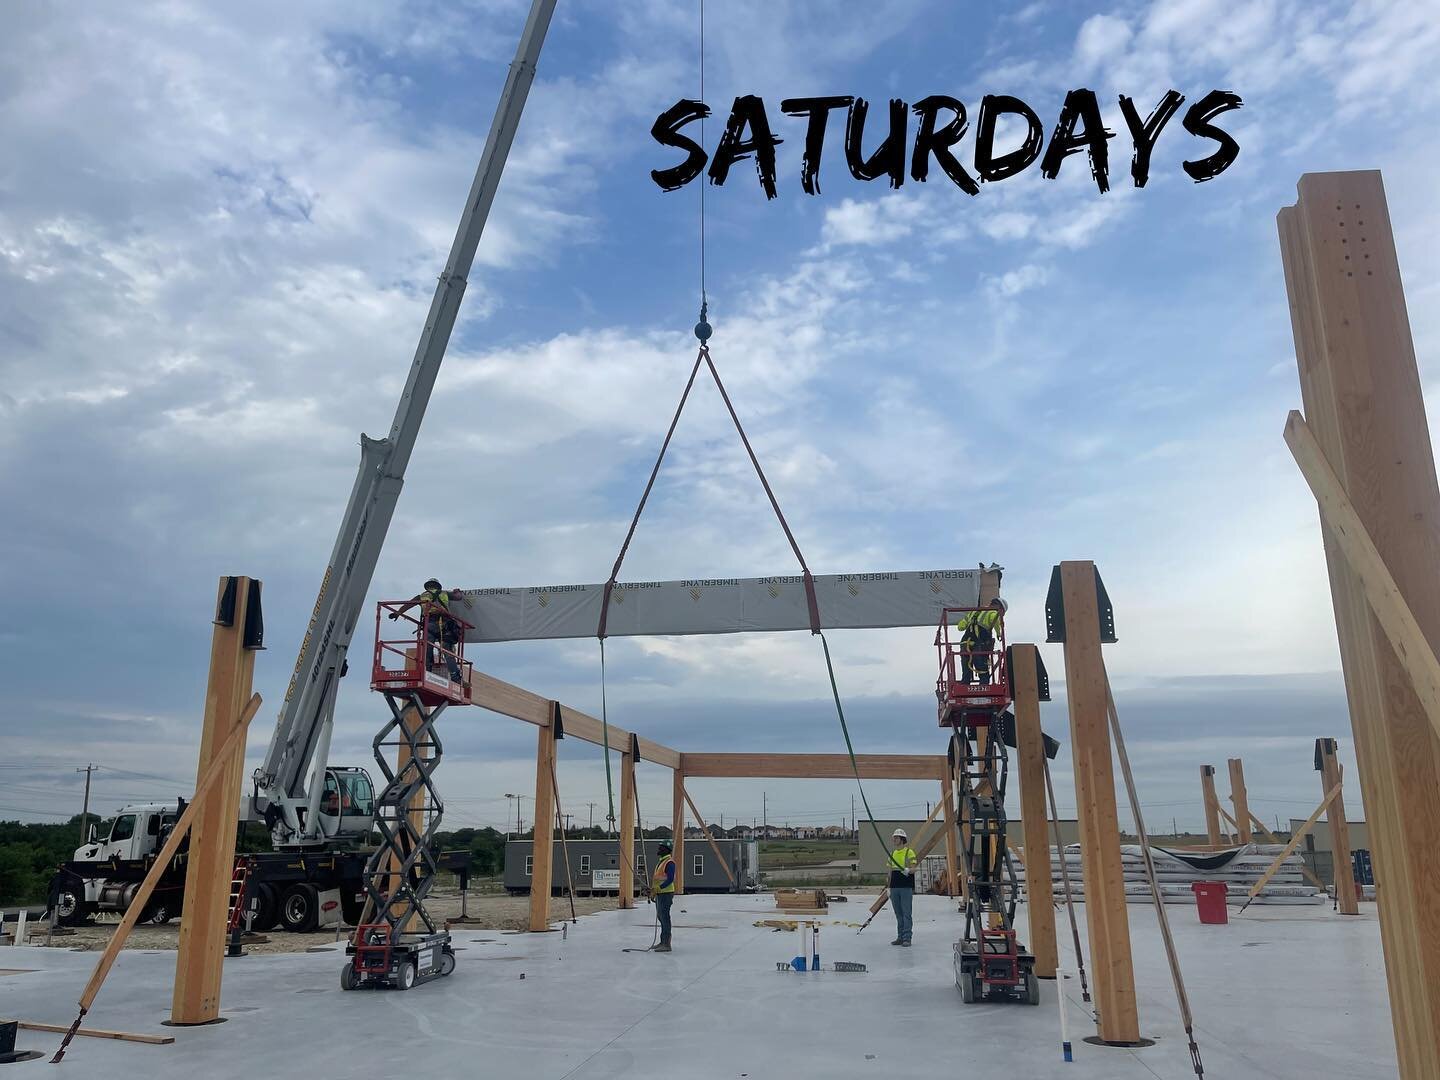 Getting it done on a Saturday!!
@mercermasstimber @timberlynegroup @leelewis_construction @rothoblaas.north.america @celina_texas @woodworksusa #masstimber #masstimberconstruction